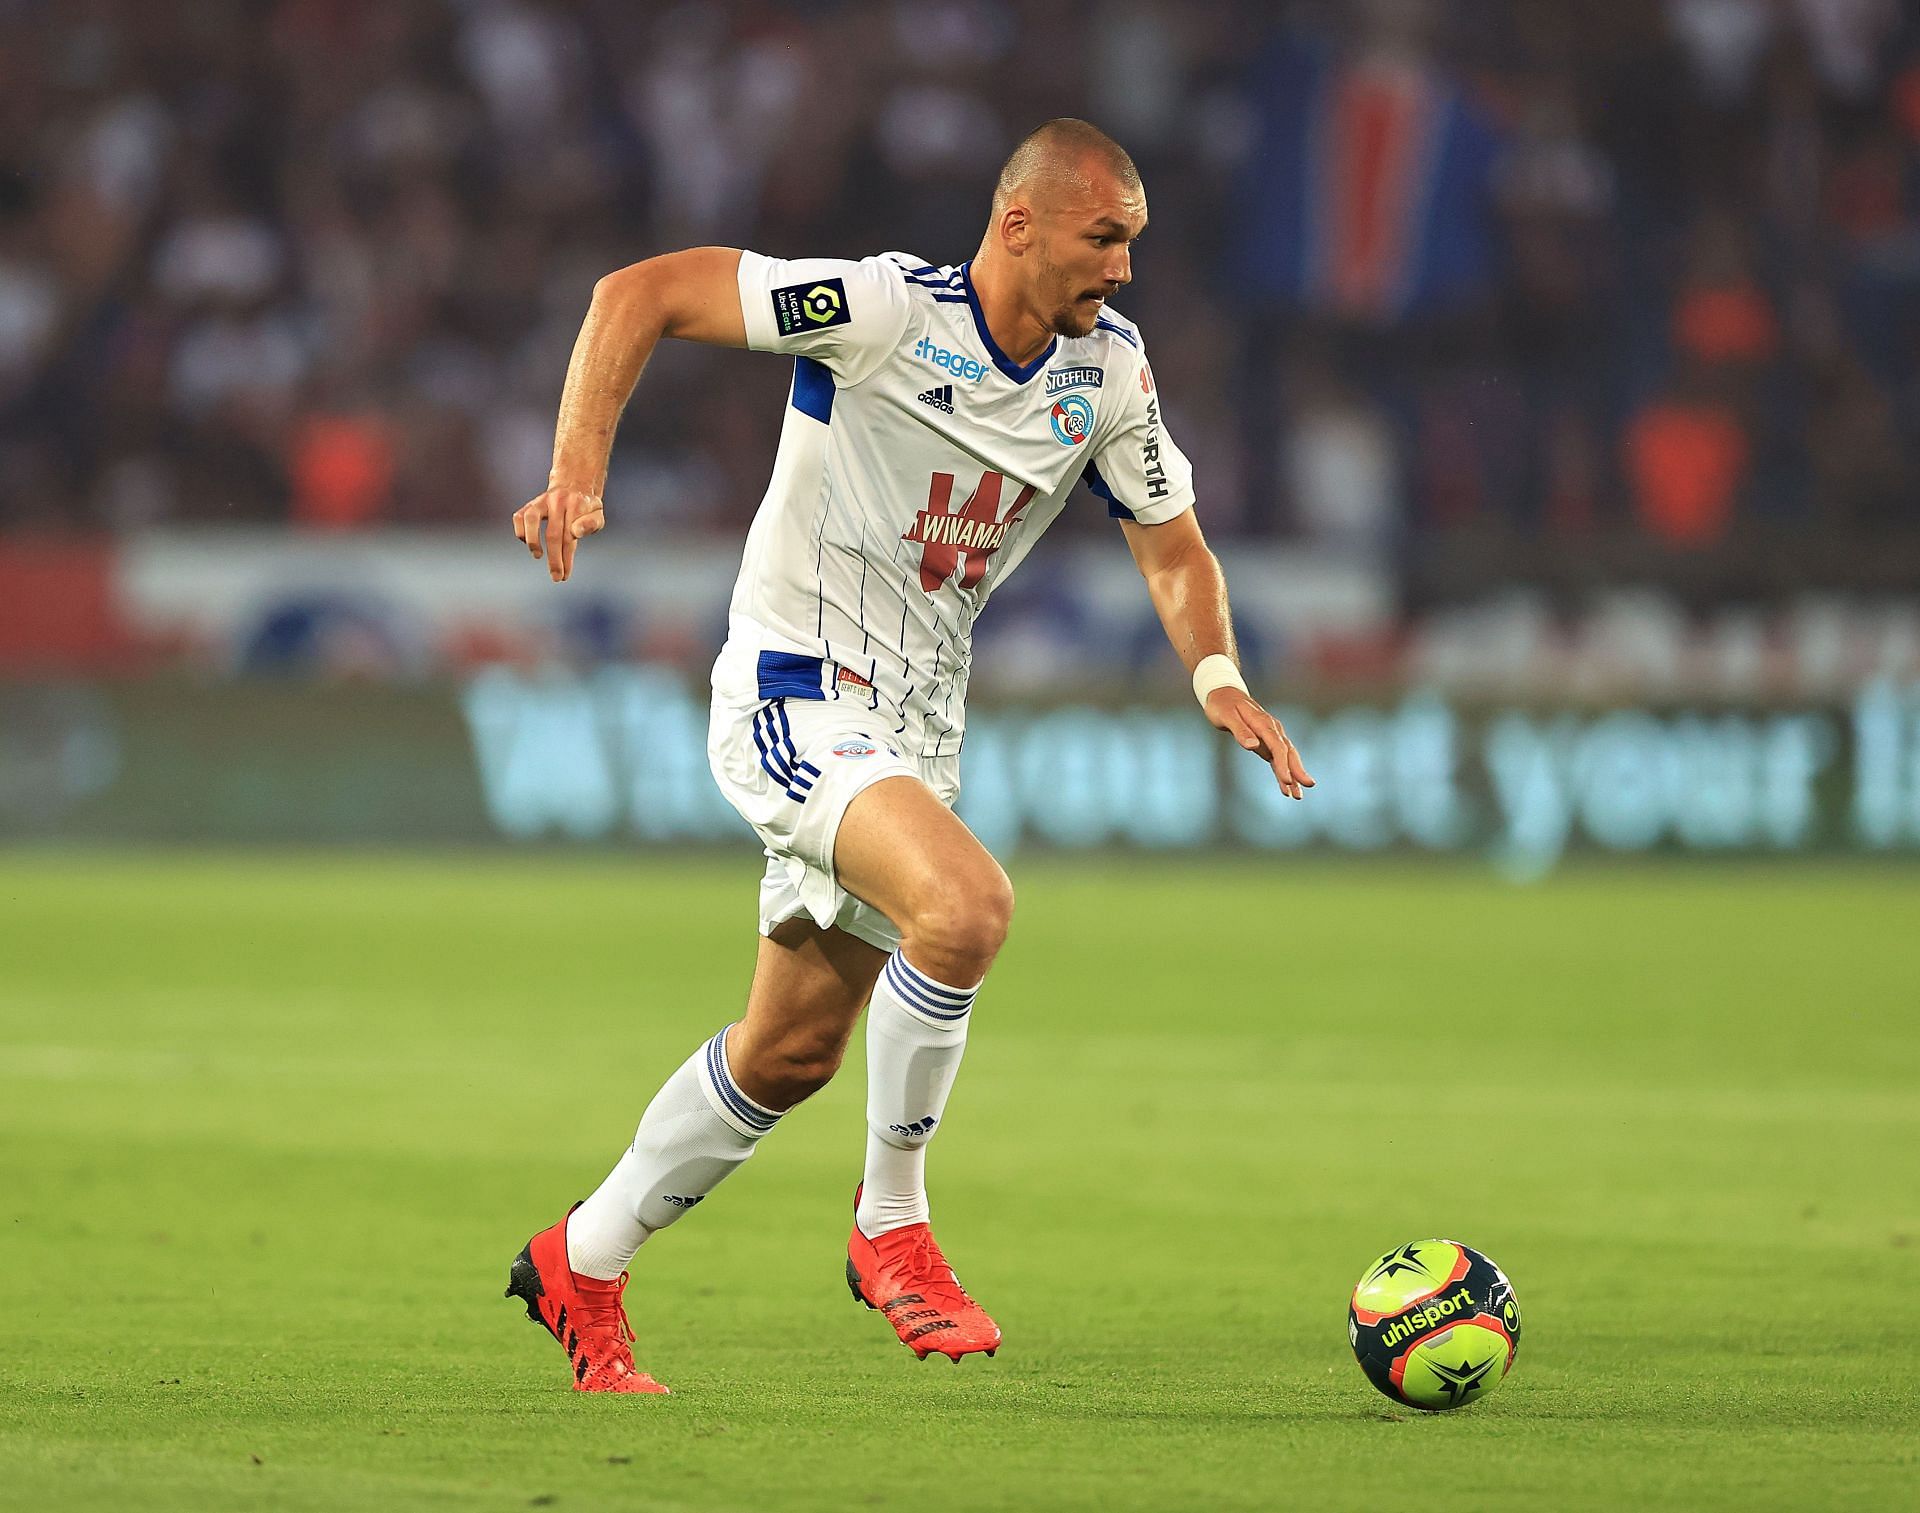 RC Strasbourg will face Bordeaux on Sunday - Ligue 1 Uber Eats